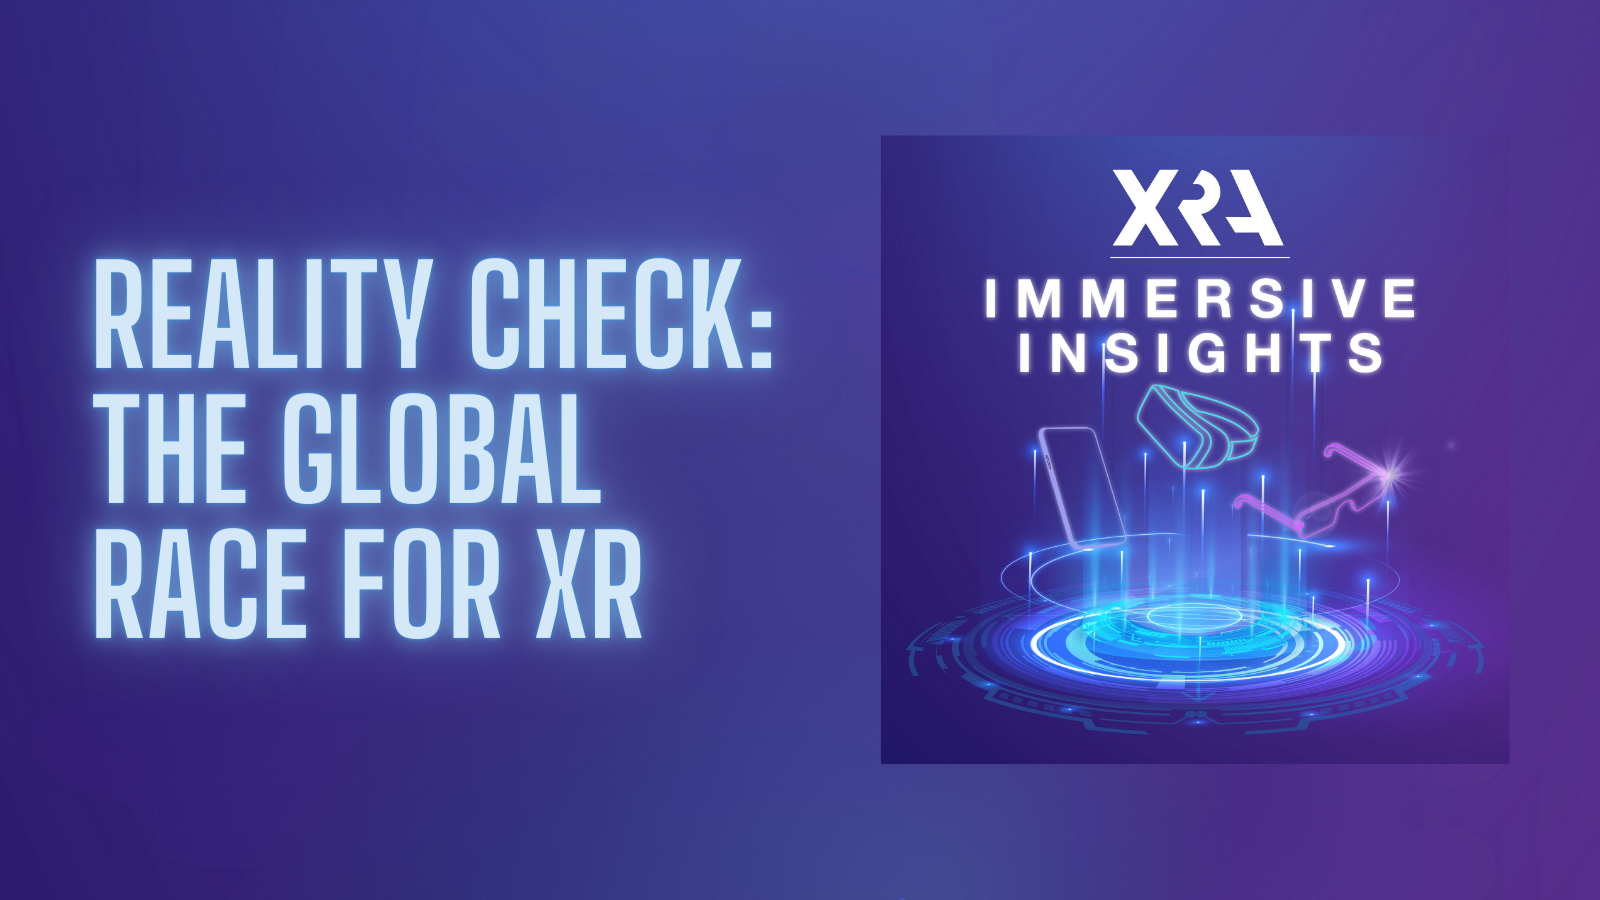 XRA INTRODUCES “IMMERSIVE INSIGHTS: REALITY CHECK” A POLICY FOCUSED LIMITED SERIES ON XR TECHNOLOGY